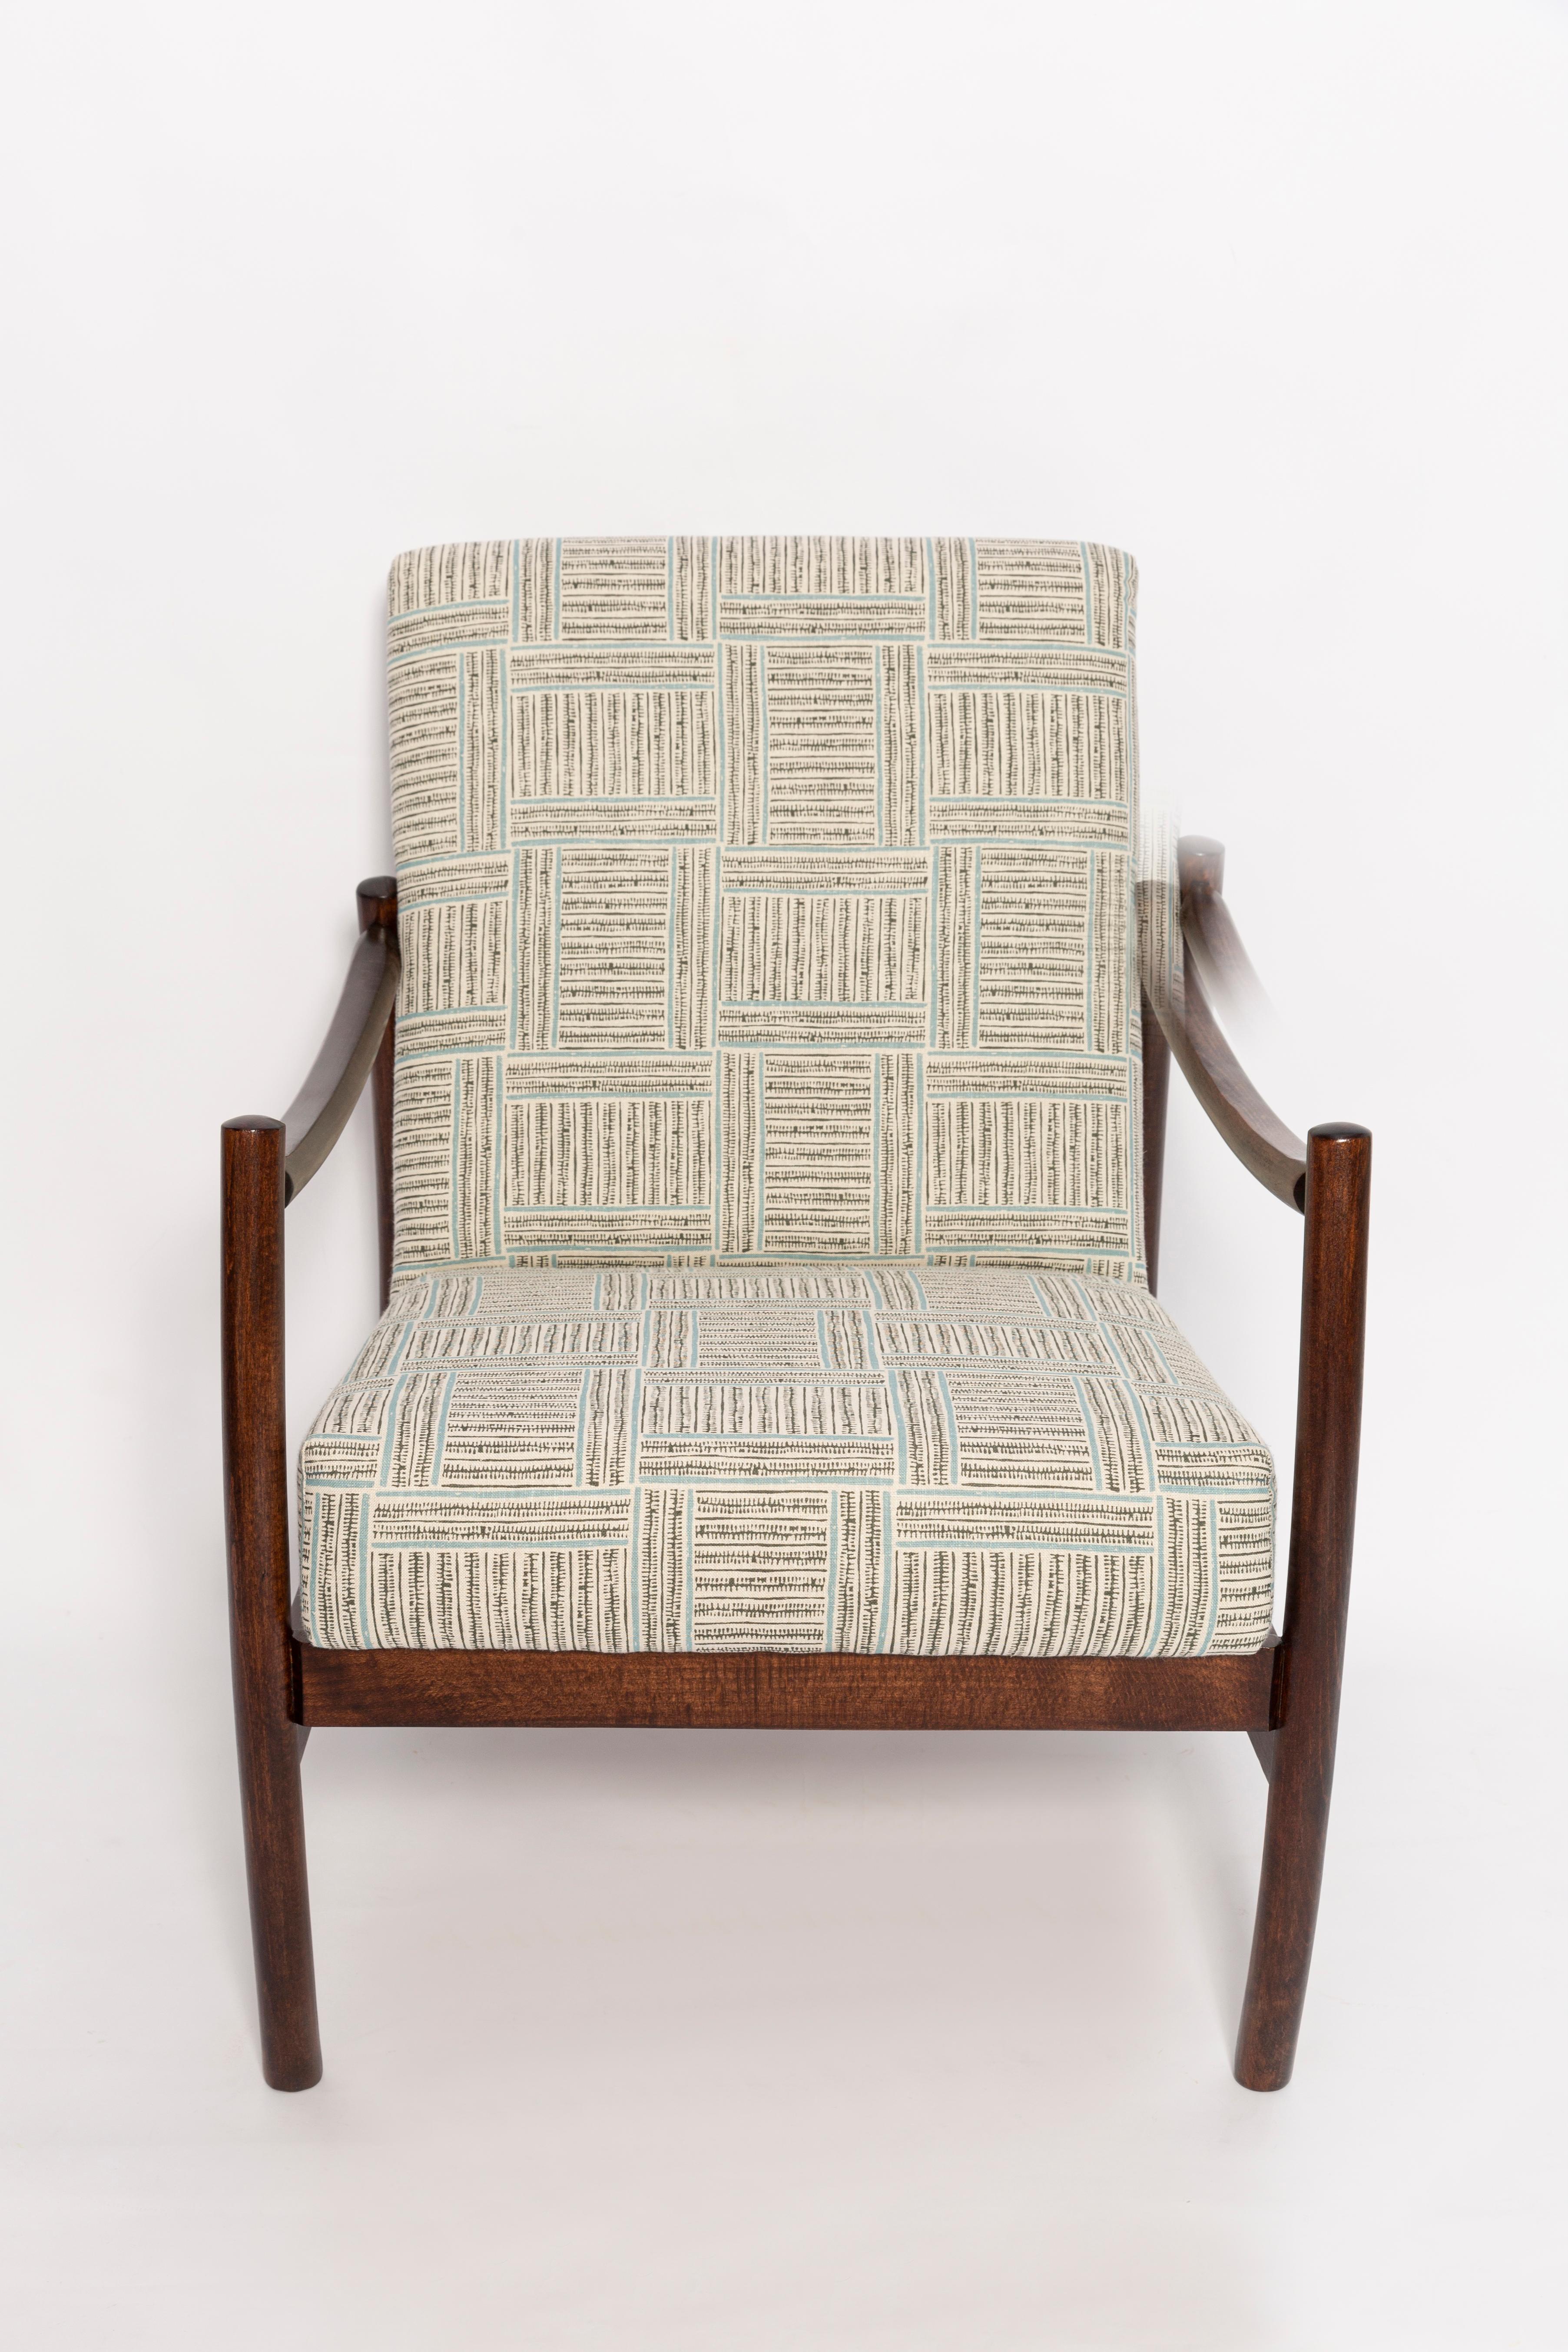 Mid-20th Century Vintage Armchair, Beige and Blue Linen, Europe, 1960s For Sale 6